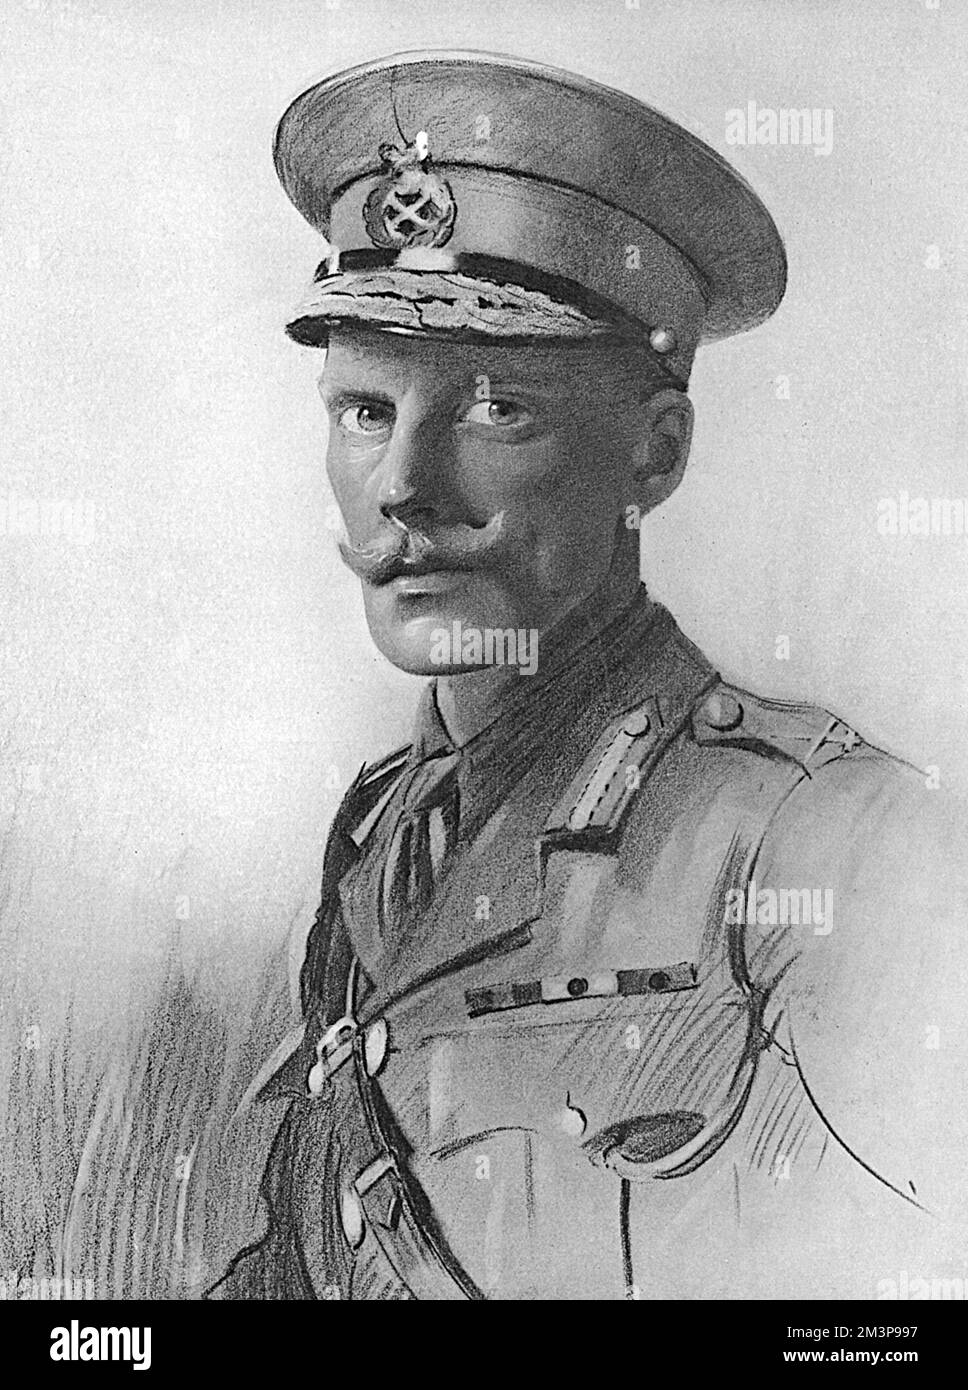 Brigadier-General Borlase Edward Wyndham Childs, CMG (1876-1946), Director of Personal Services in the British Army during the First World War, drawn by Lieutenant Percival Anderson.  His position included the supervision of discipline in the army.  He originally studied law and got a commission in the Duke of Cornwall's Light Infantry in 1900.  He landed in South Africa just after peace had been concluded, but gained his first experience of staff work as Garrison Adjutant at Cape Town.  He went to France on GHQ Staff in 1914, adn became Assistant Adjutant-General, a position he held until 191 Stock Photo